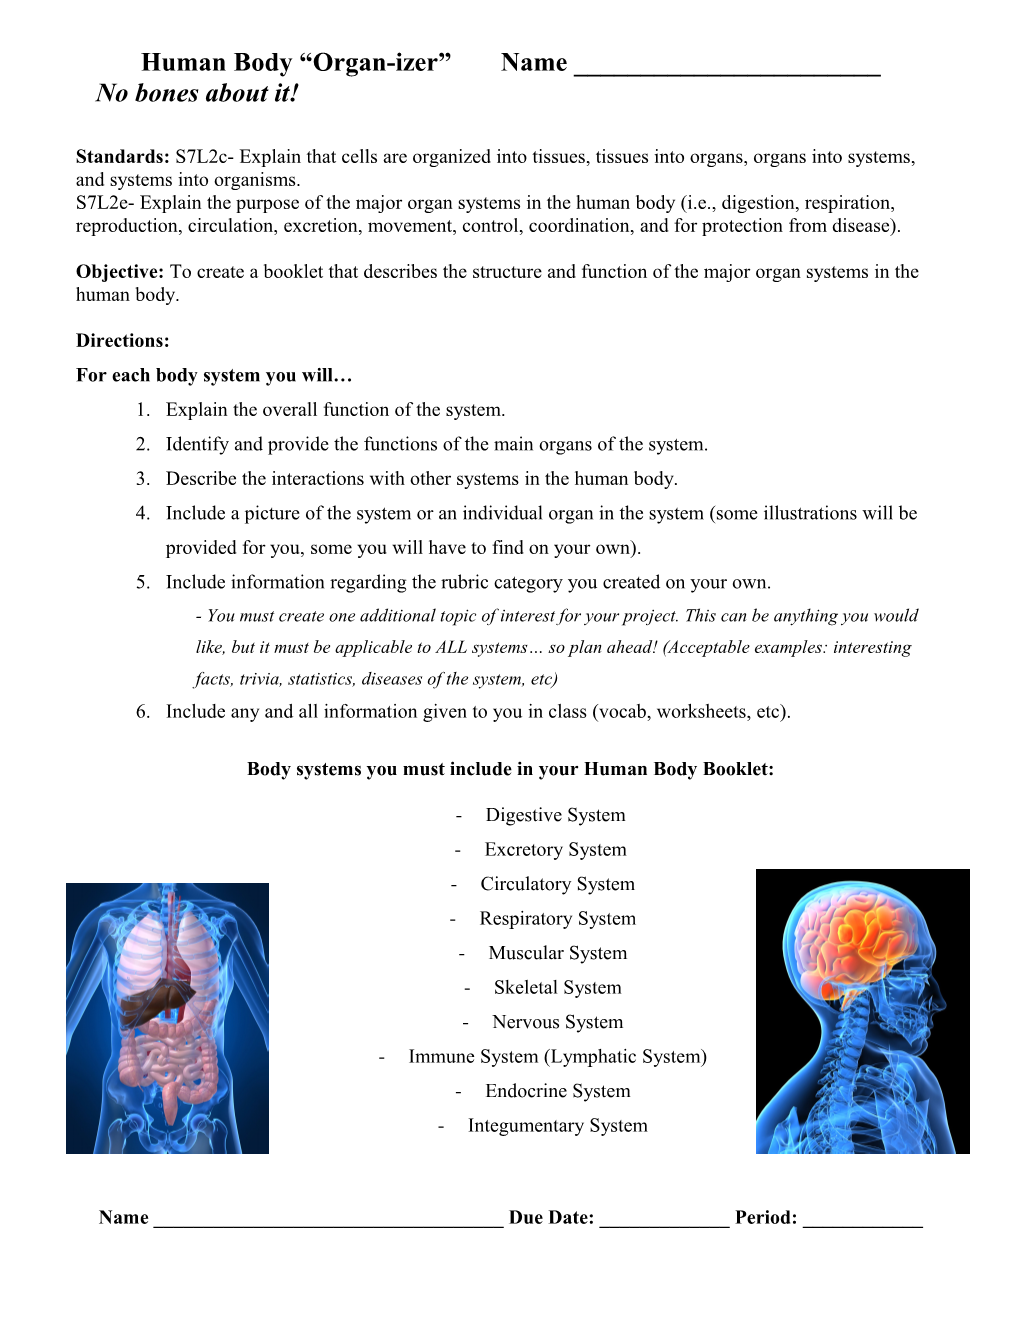 Human Body Booklet